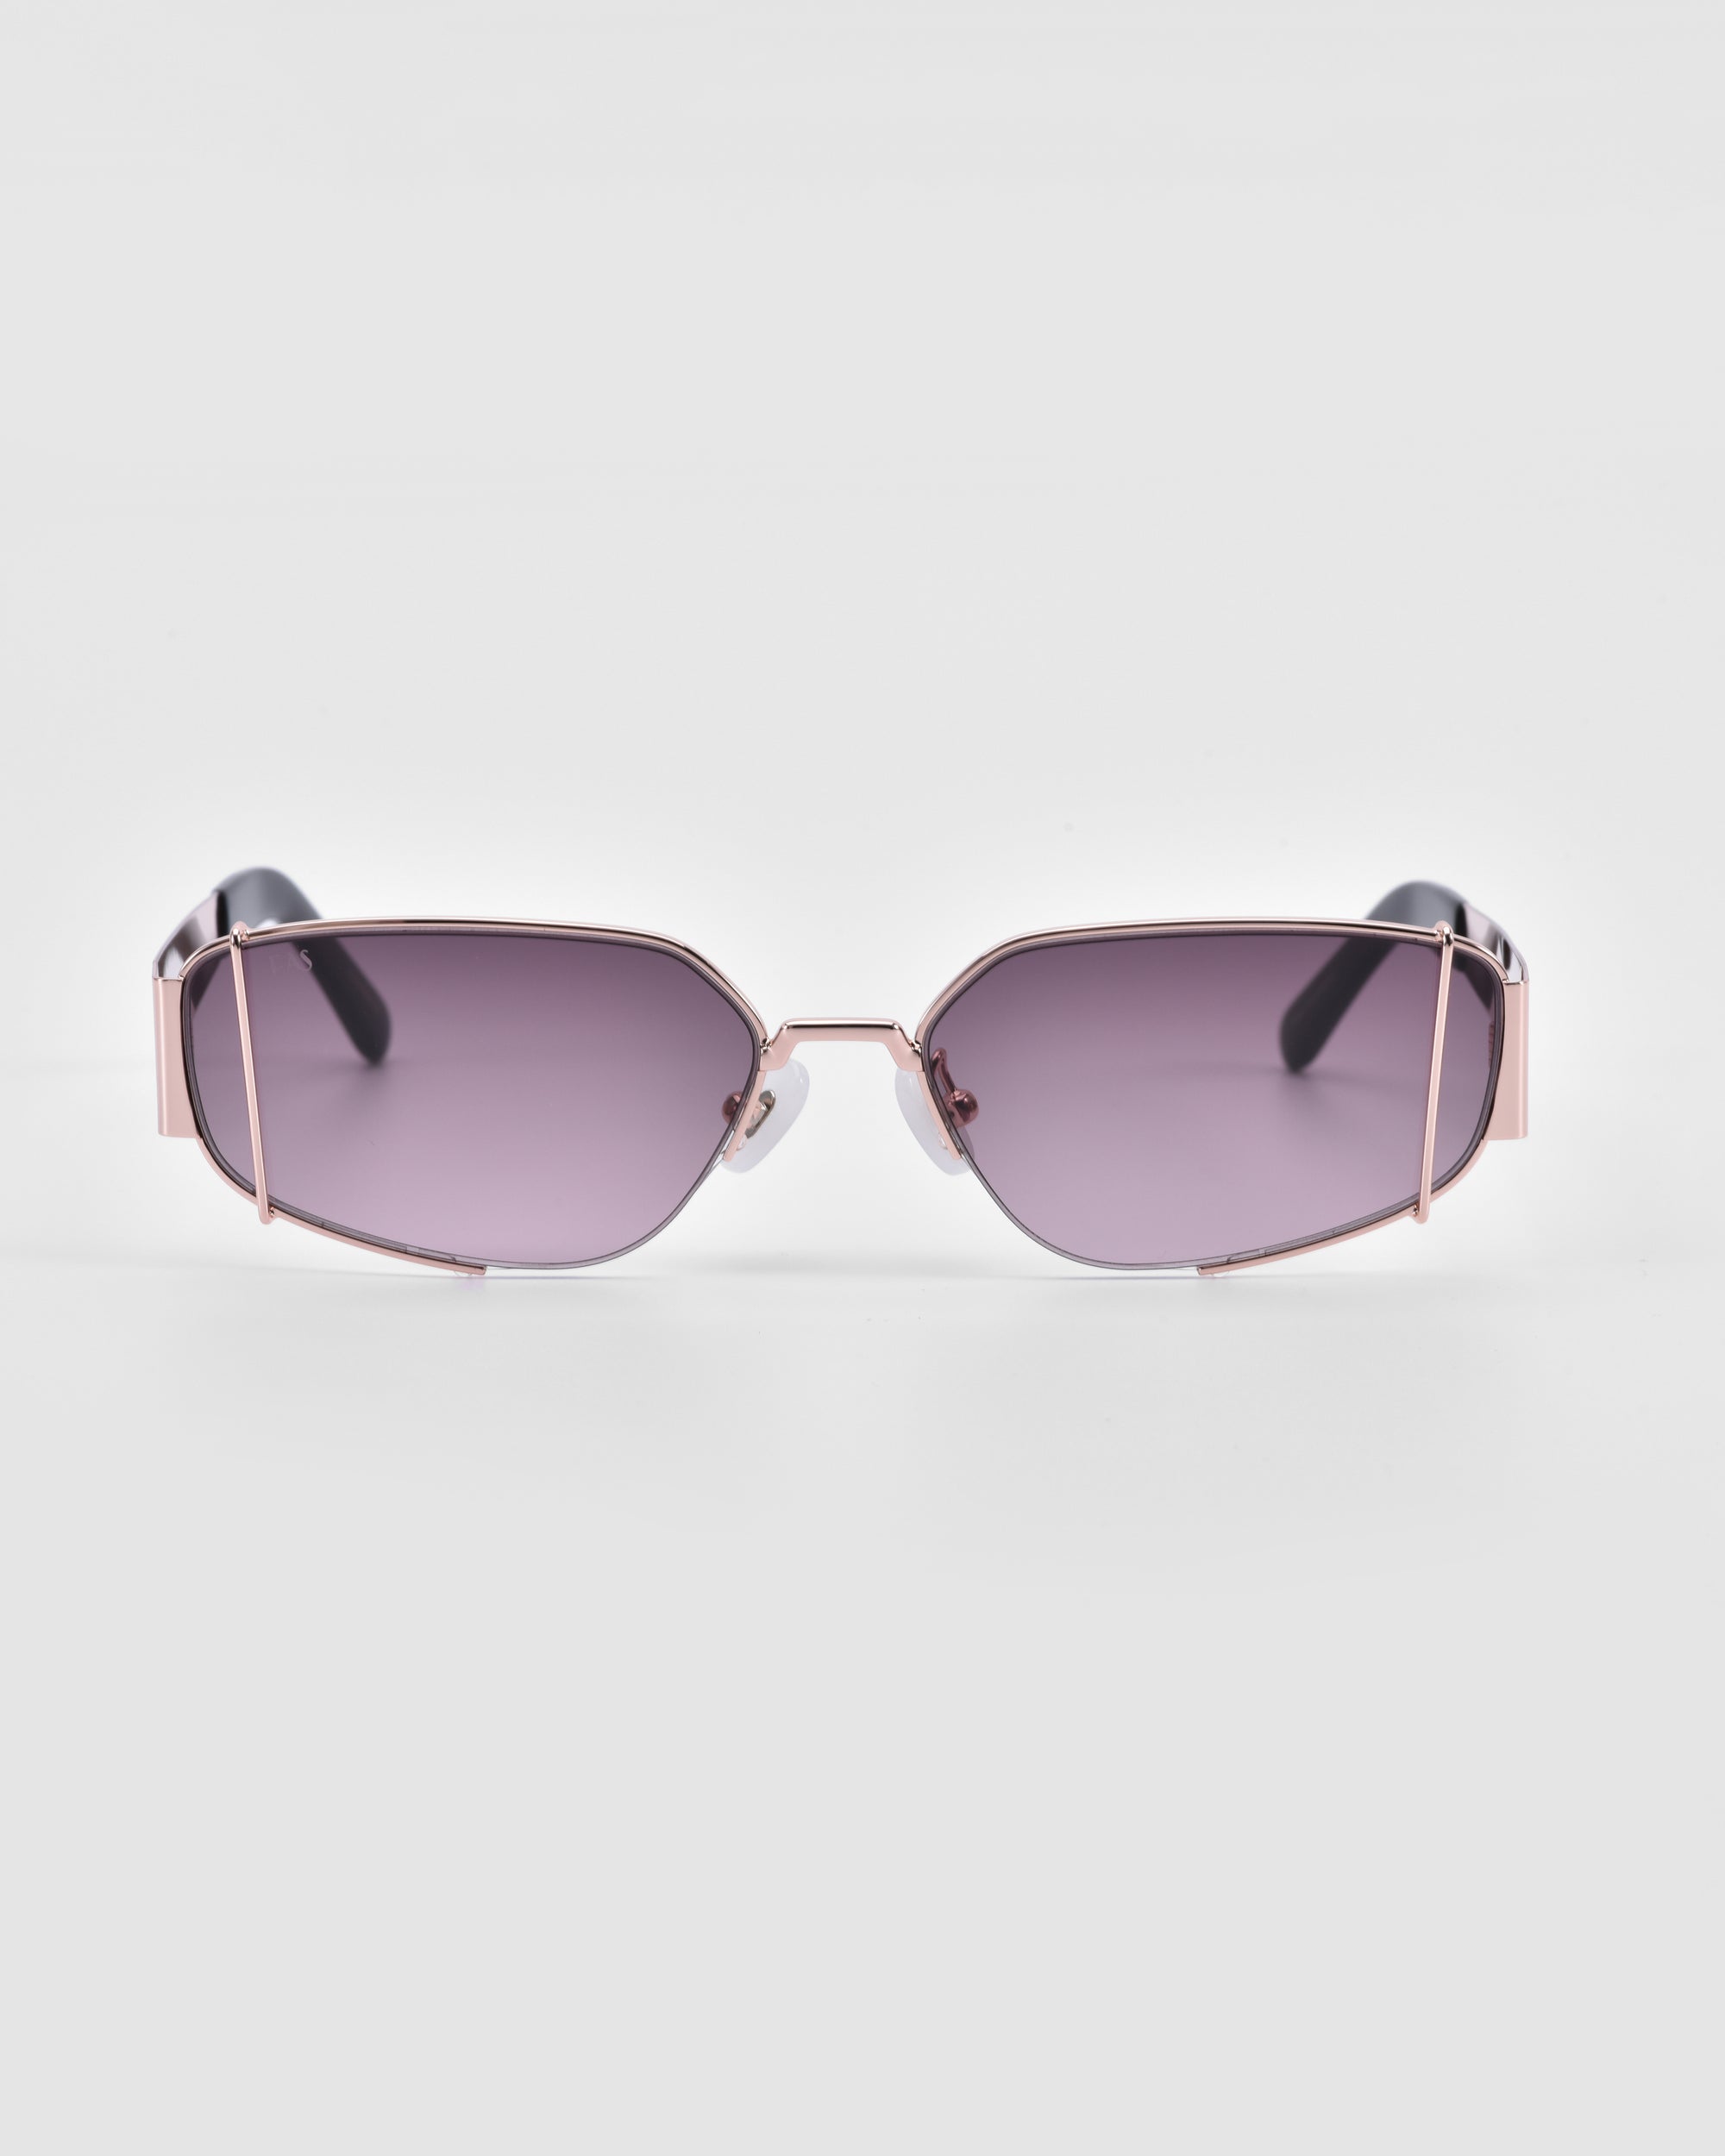 A pair of stylish Talia sunglasses from For Art&#39;s Sake® with hexagonal, purple-tinted lenses and 18-karat rose gold metal frames. The temples have black tips, and the lenses feature a sleek, minimalist design. The background is plain white.